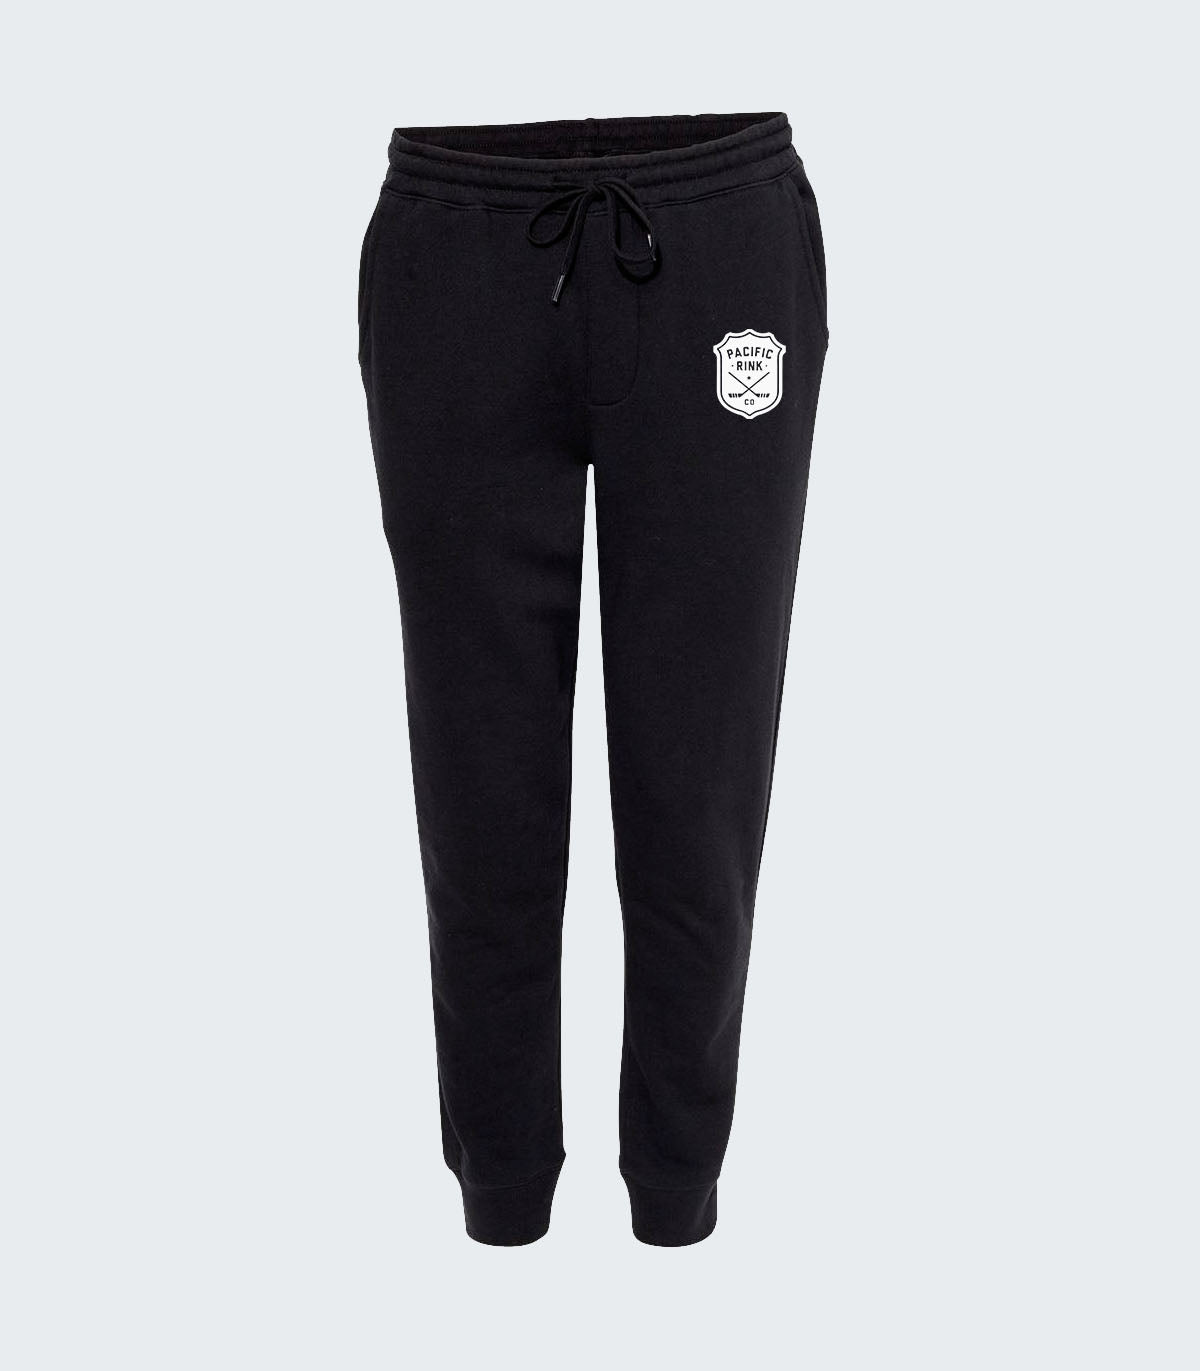 University of the Pacific Jogger Pants